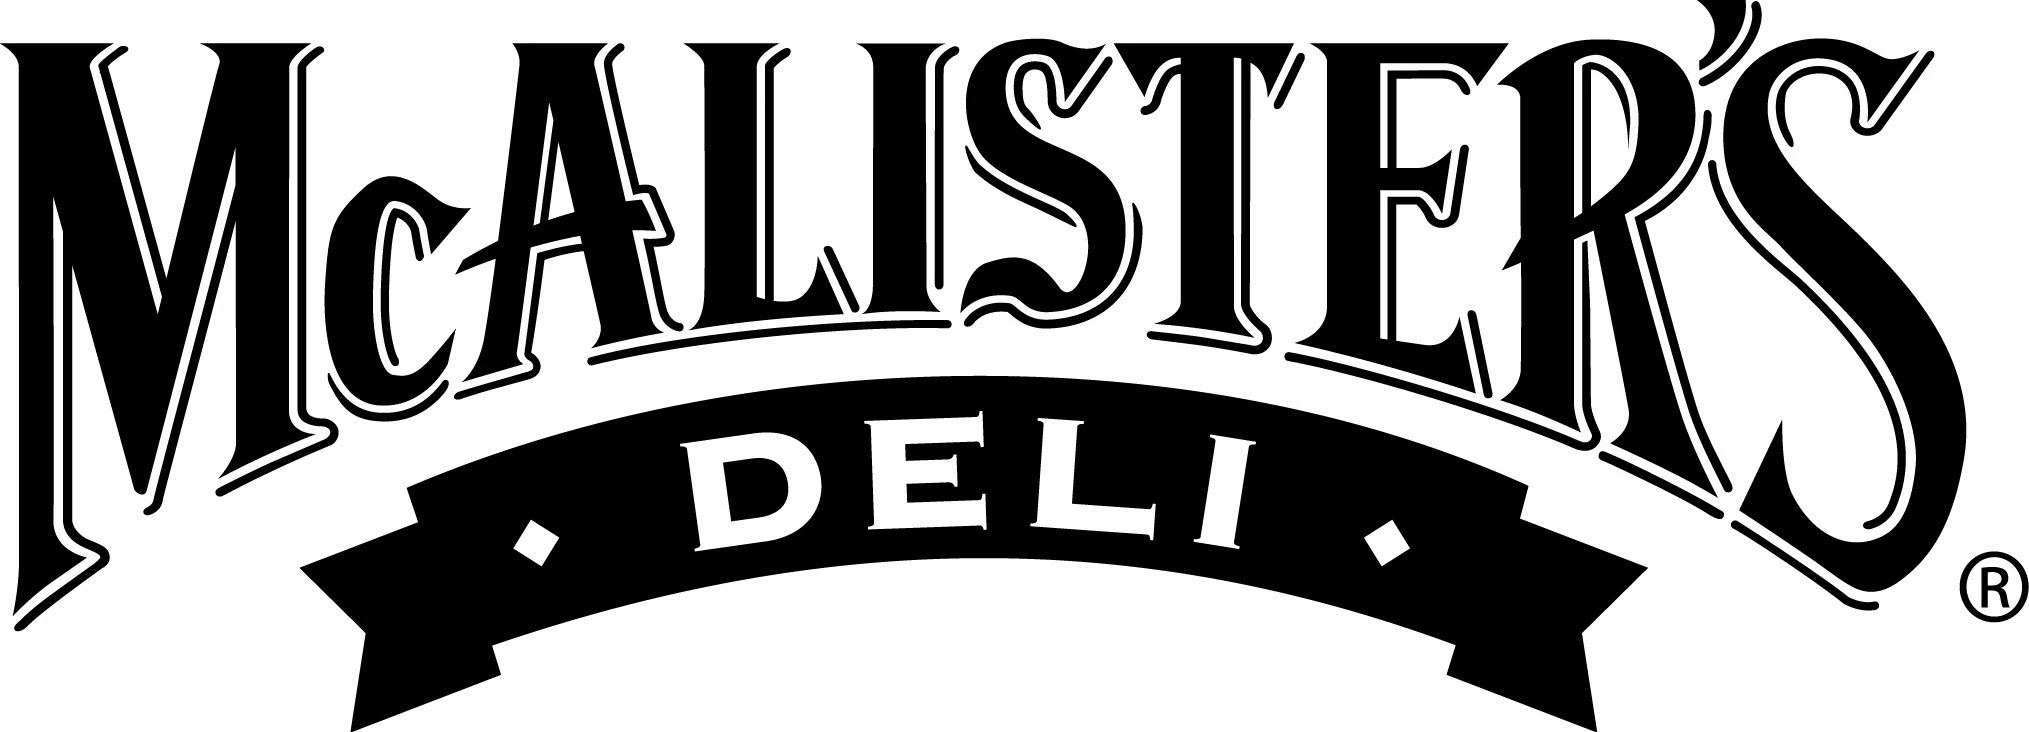 McAlister's Deli - Eat & Drink - Dining